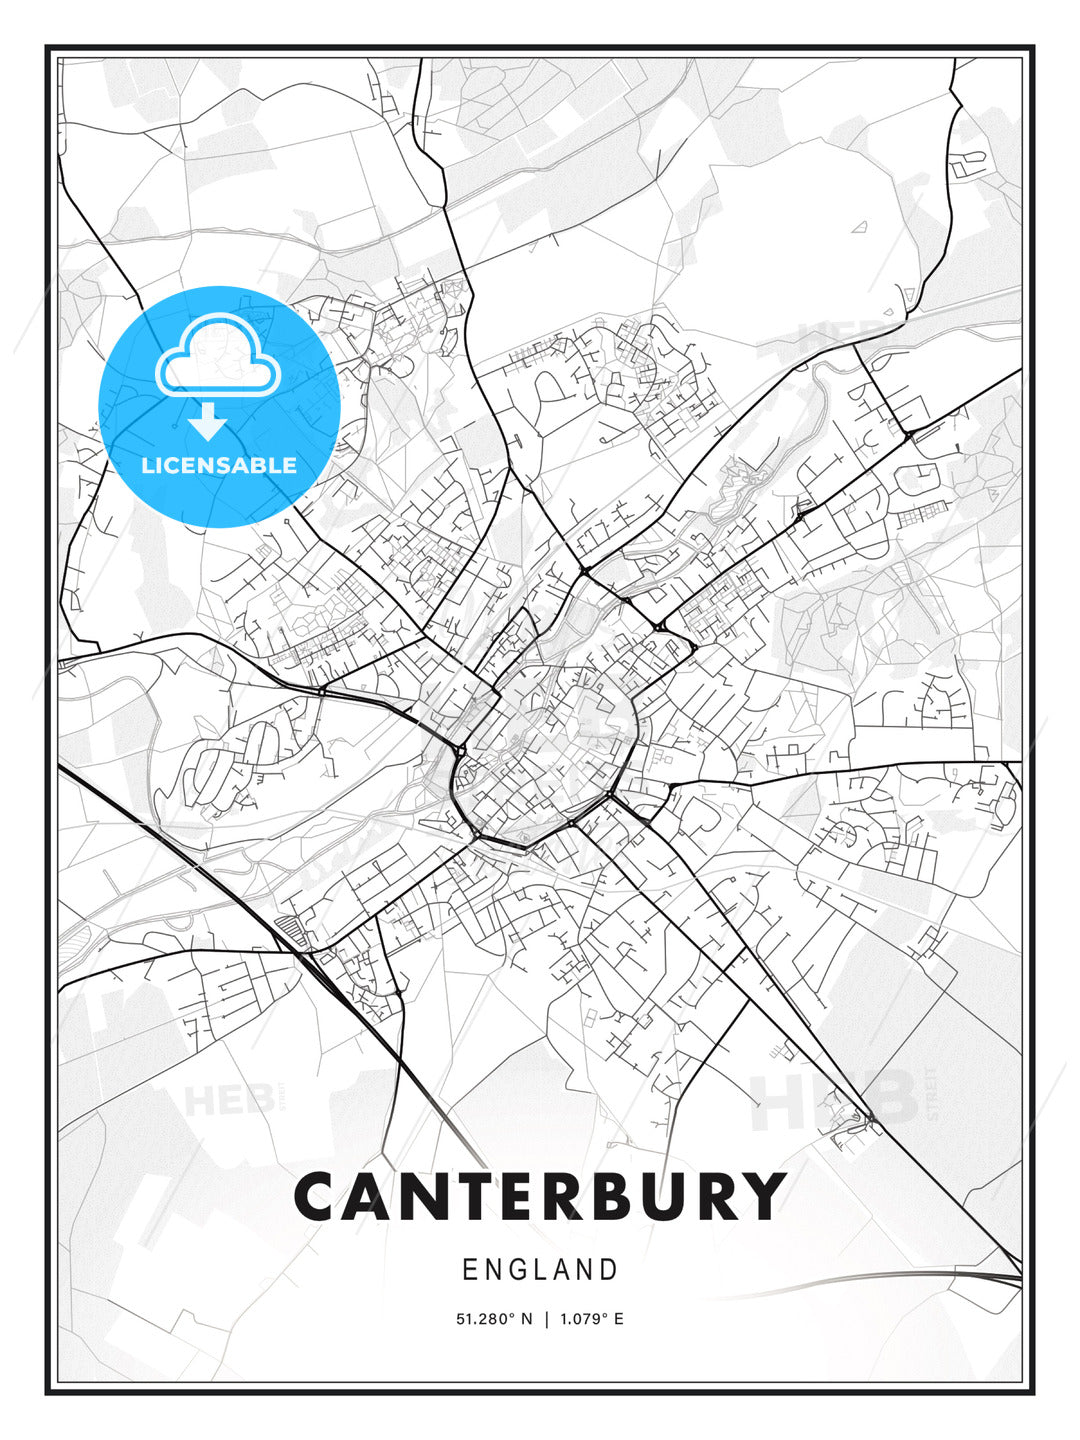 Canterbury, England, Modern Print Template in Various Formats - HEBSTREITS Sketches